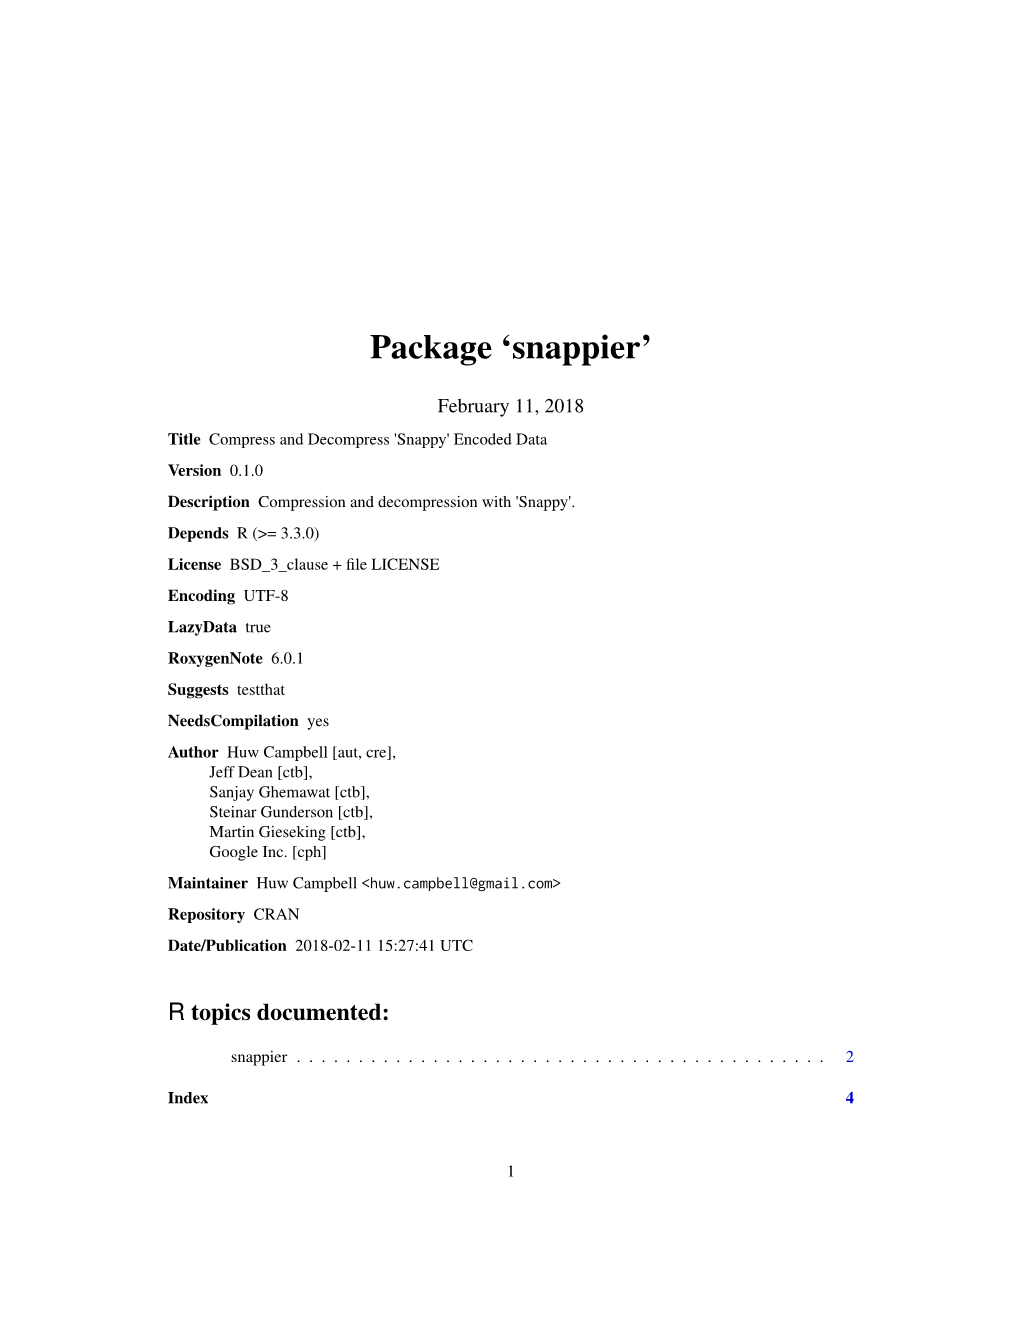 Package 'Snappier'